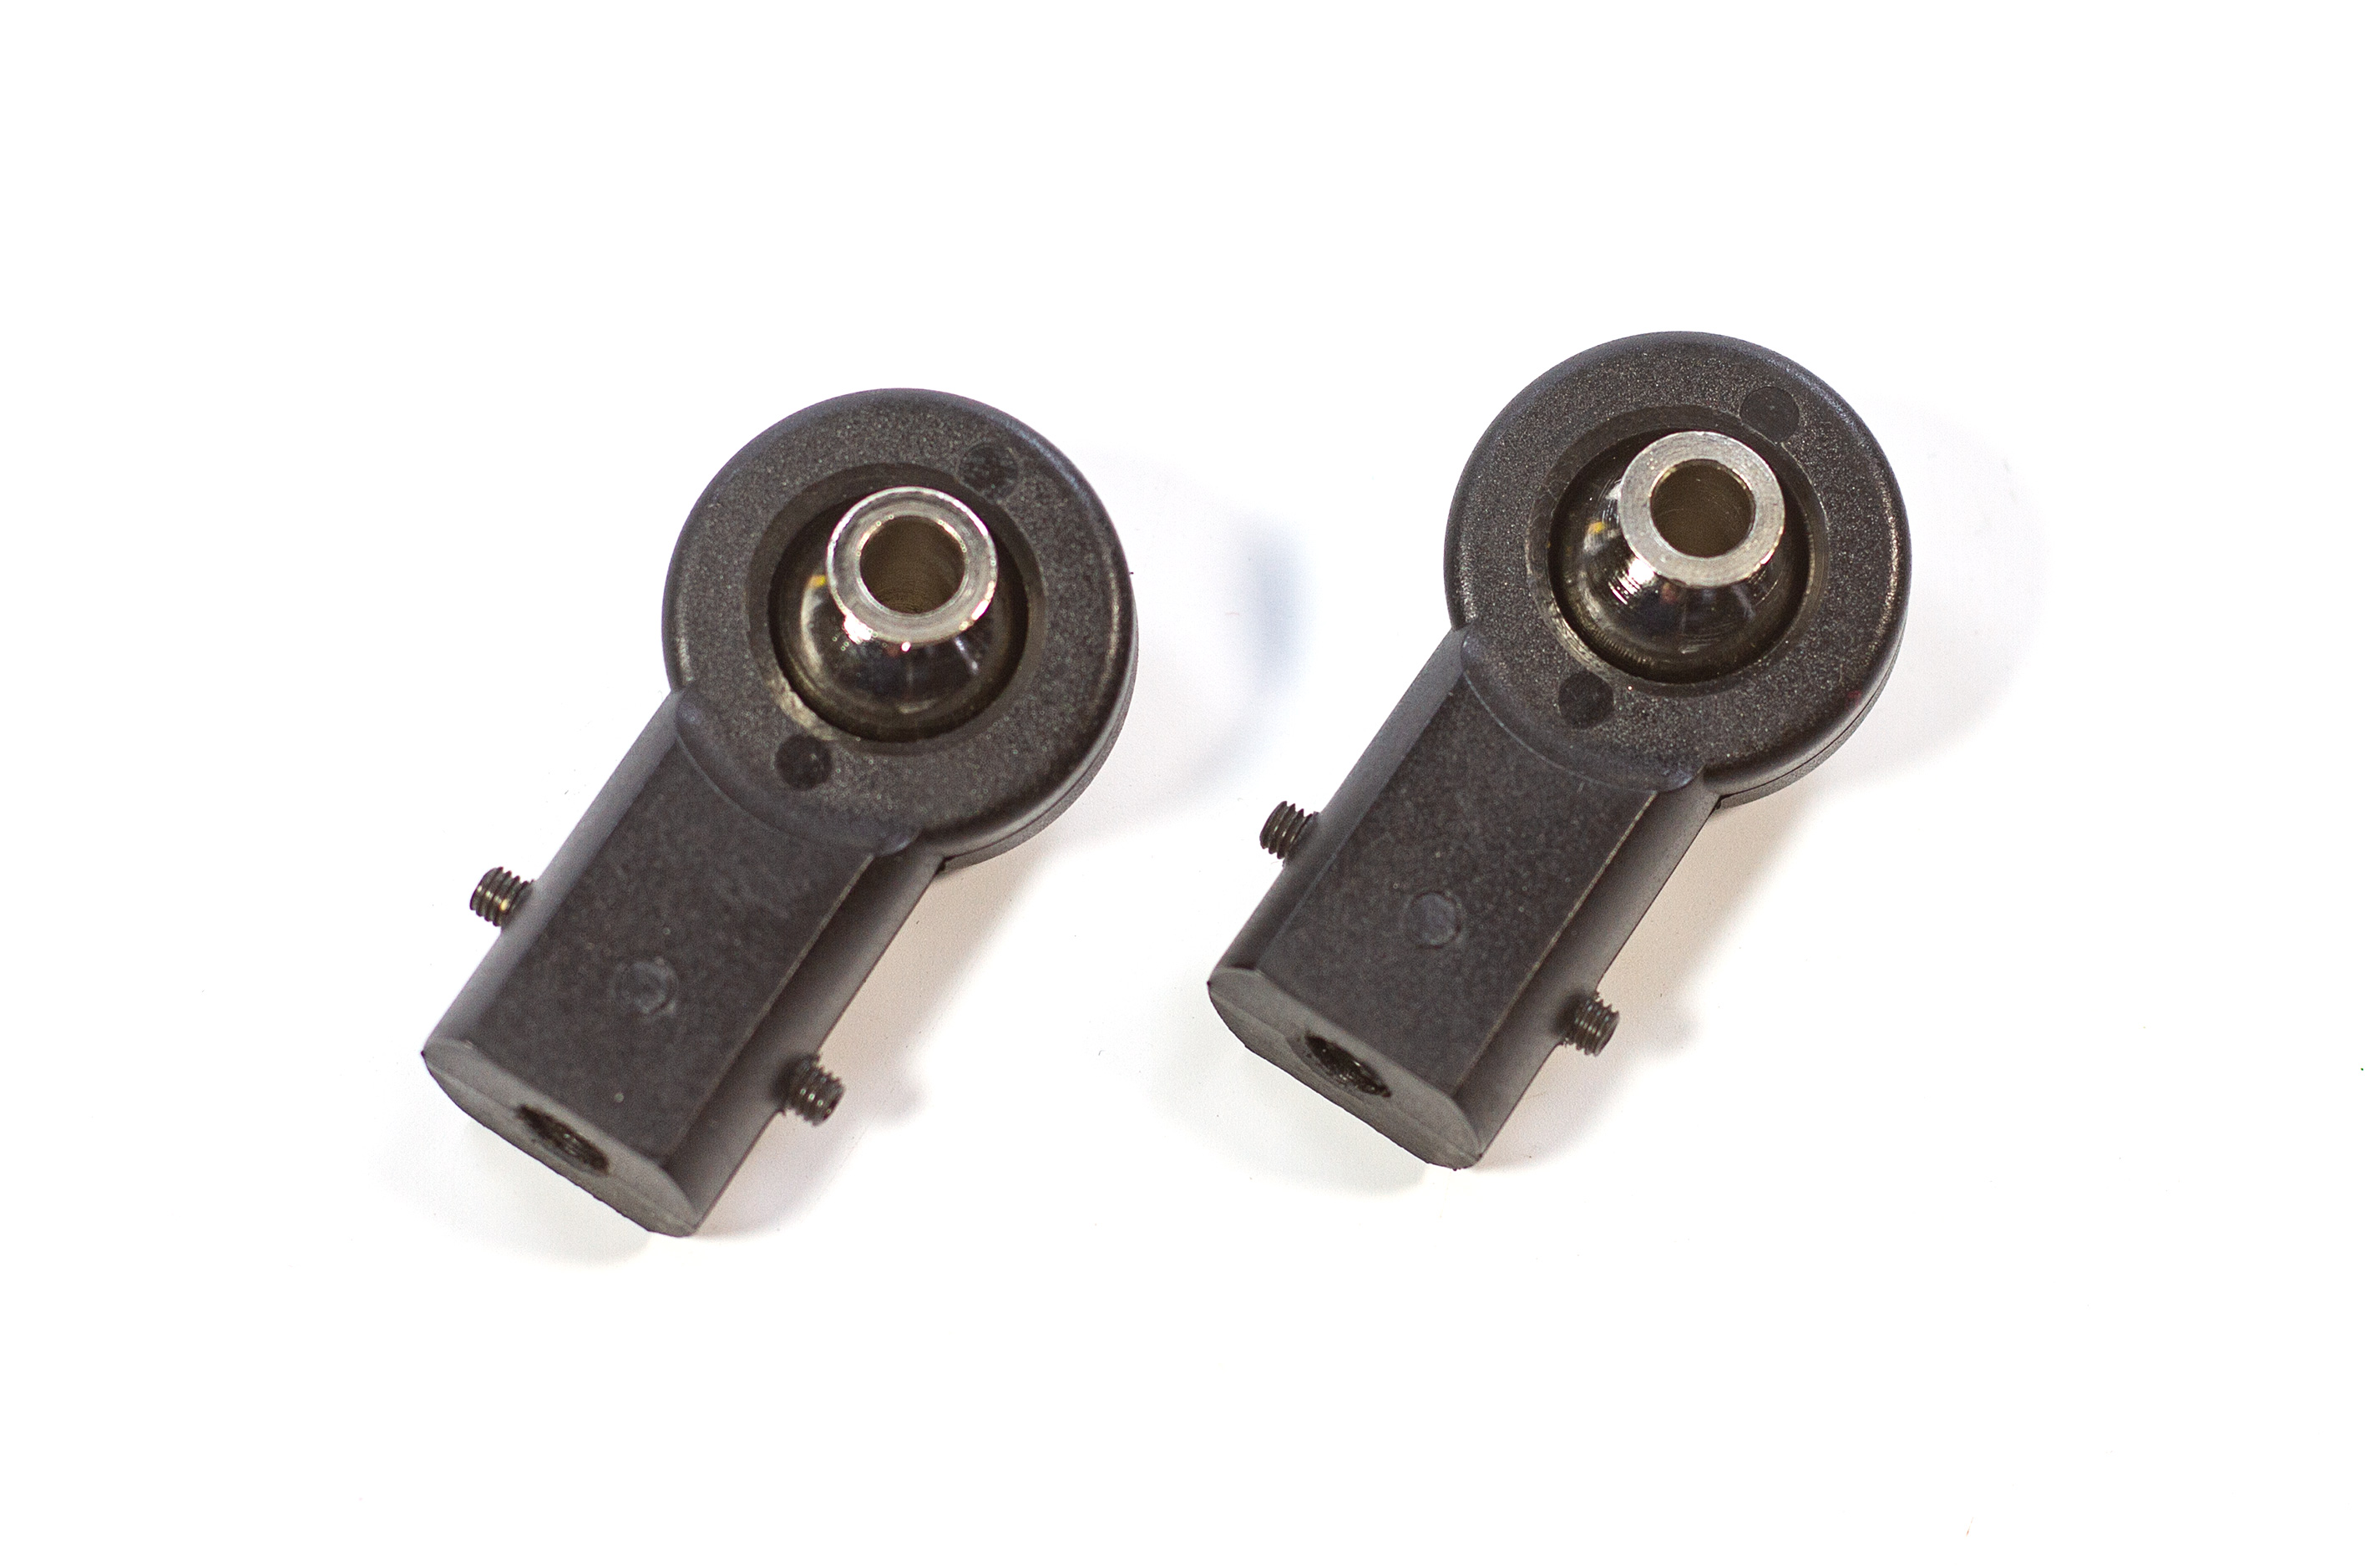 BJ057/BE Replacement ball joints for GPM alloy a-arms rear upper HPI Baja / Carson Wild GP Attack.